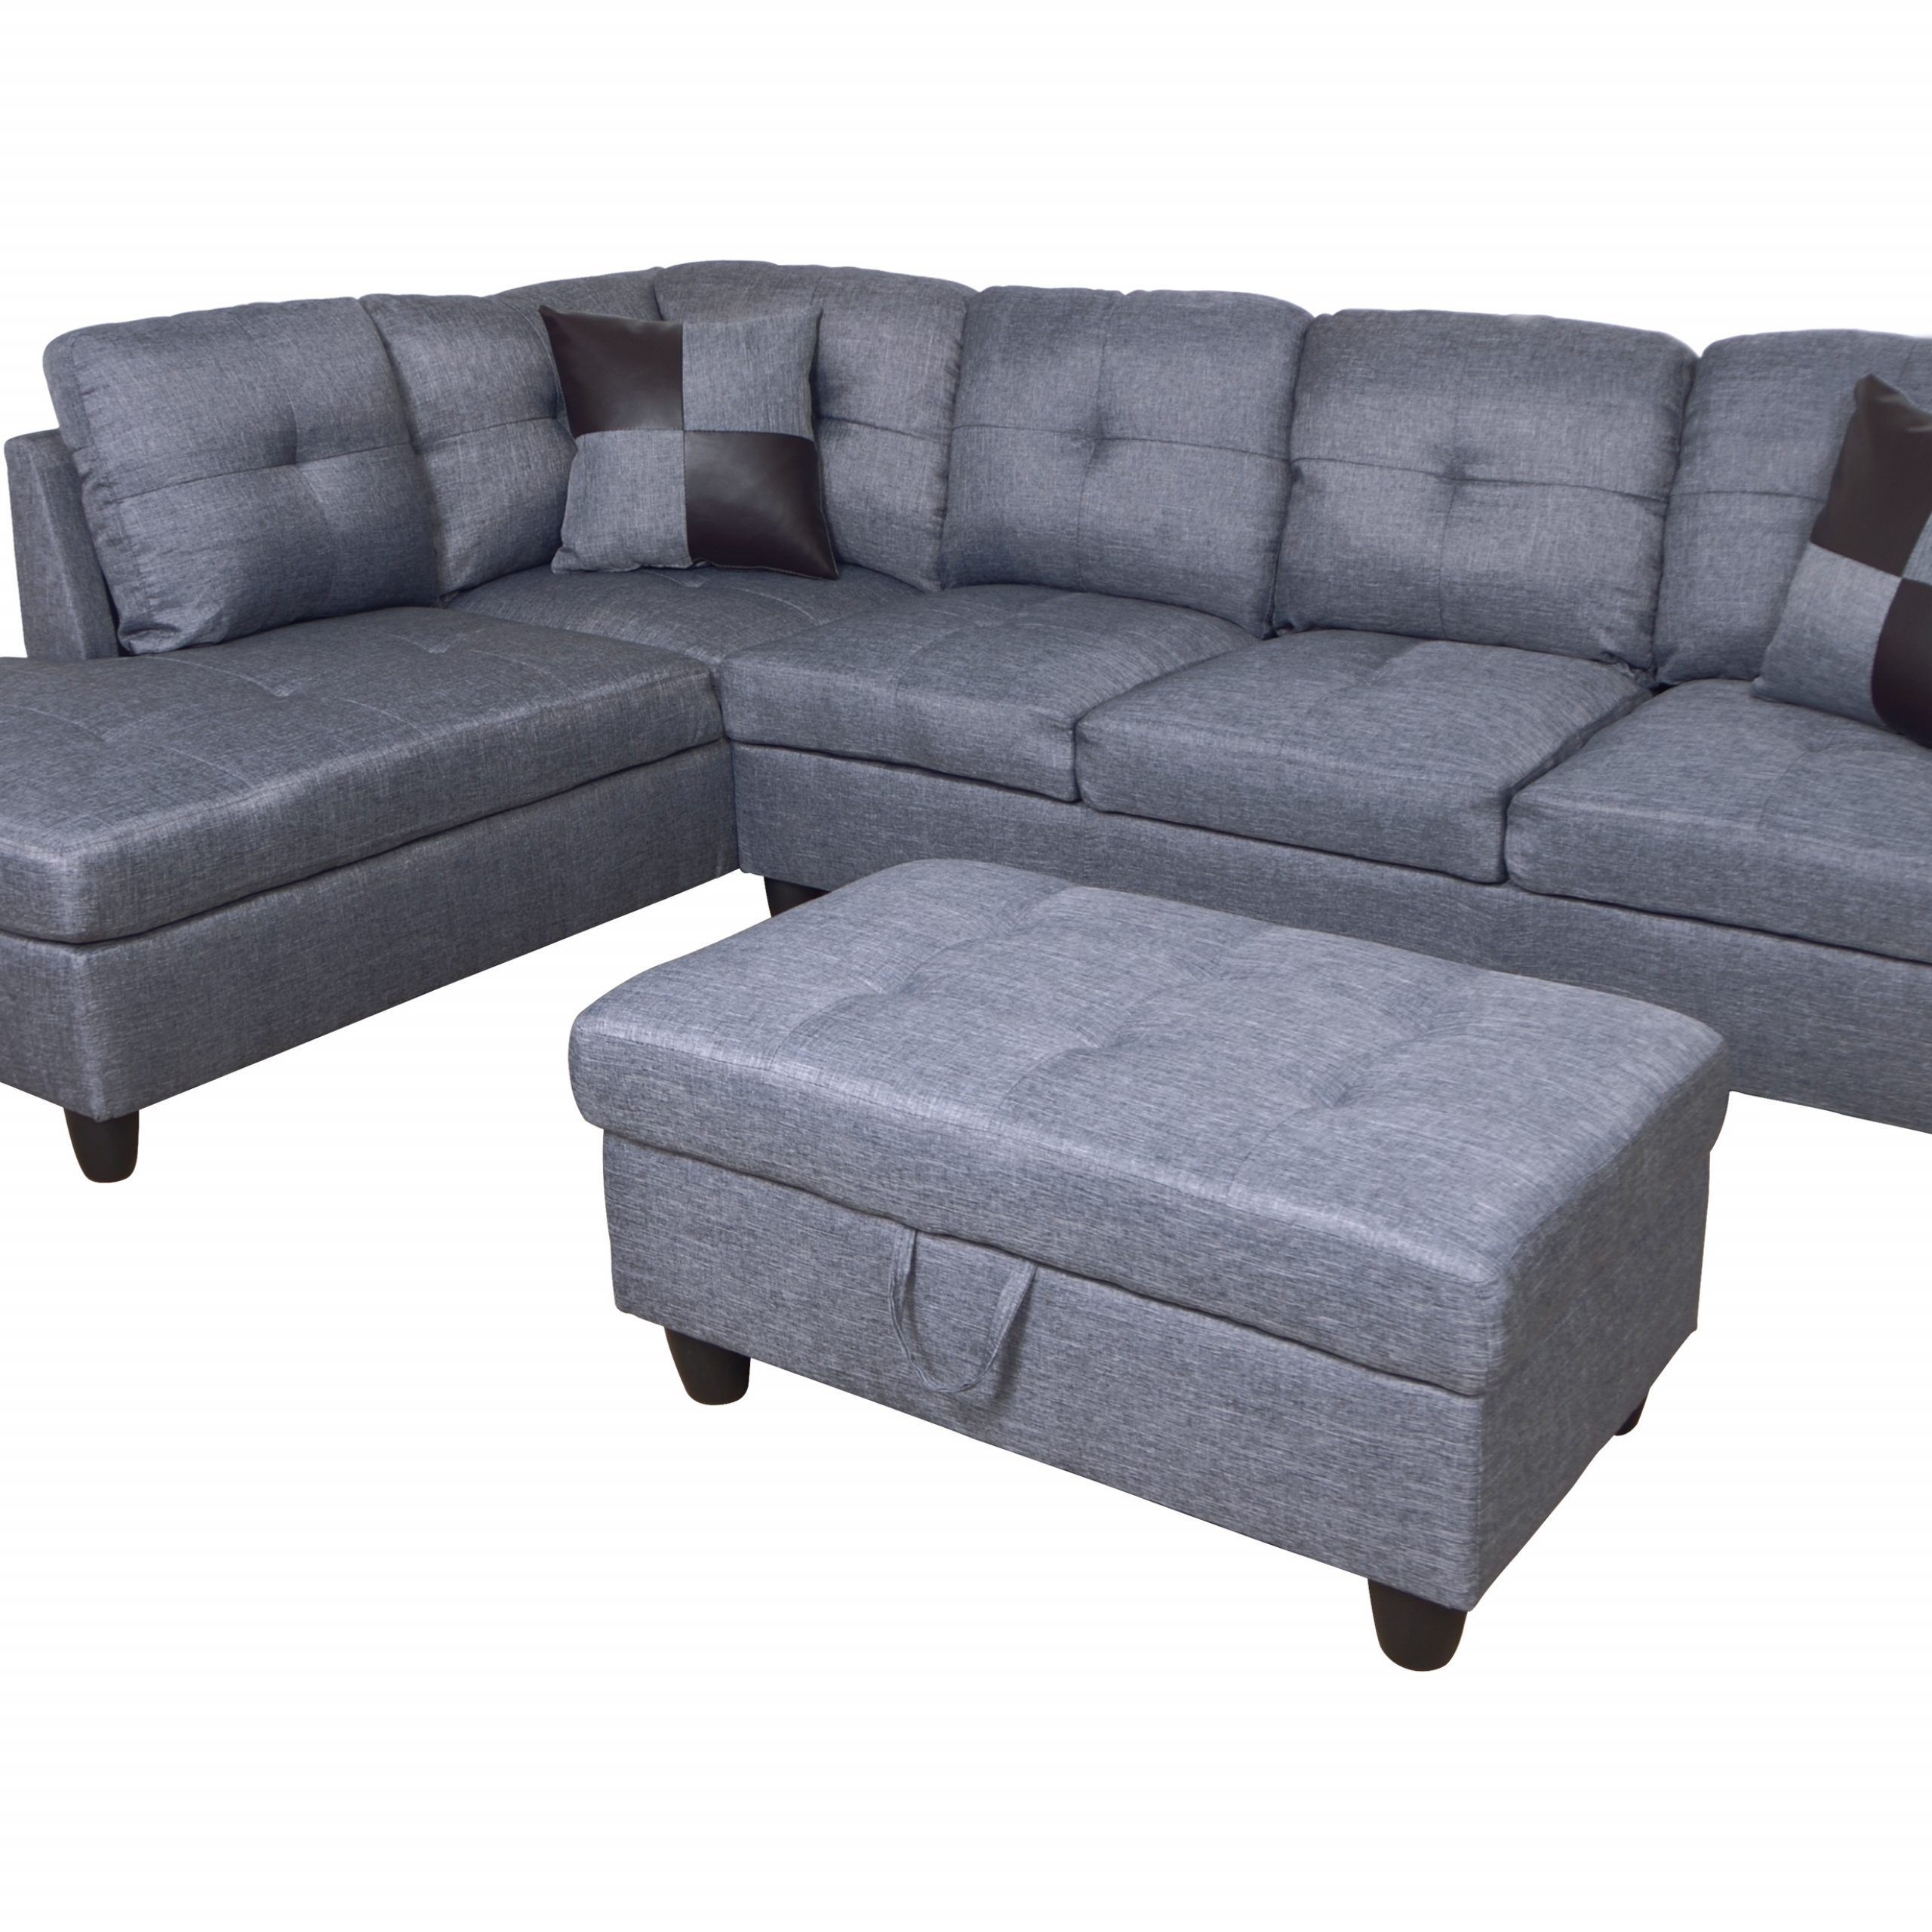 Hermann Left Chaise Sectional Sofa With Storage Ottoman Within Celine Sectional Futon Sofas With Storage Reclining Couch (View 7 of 15)